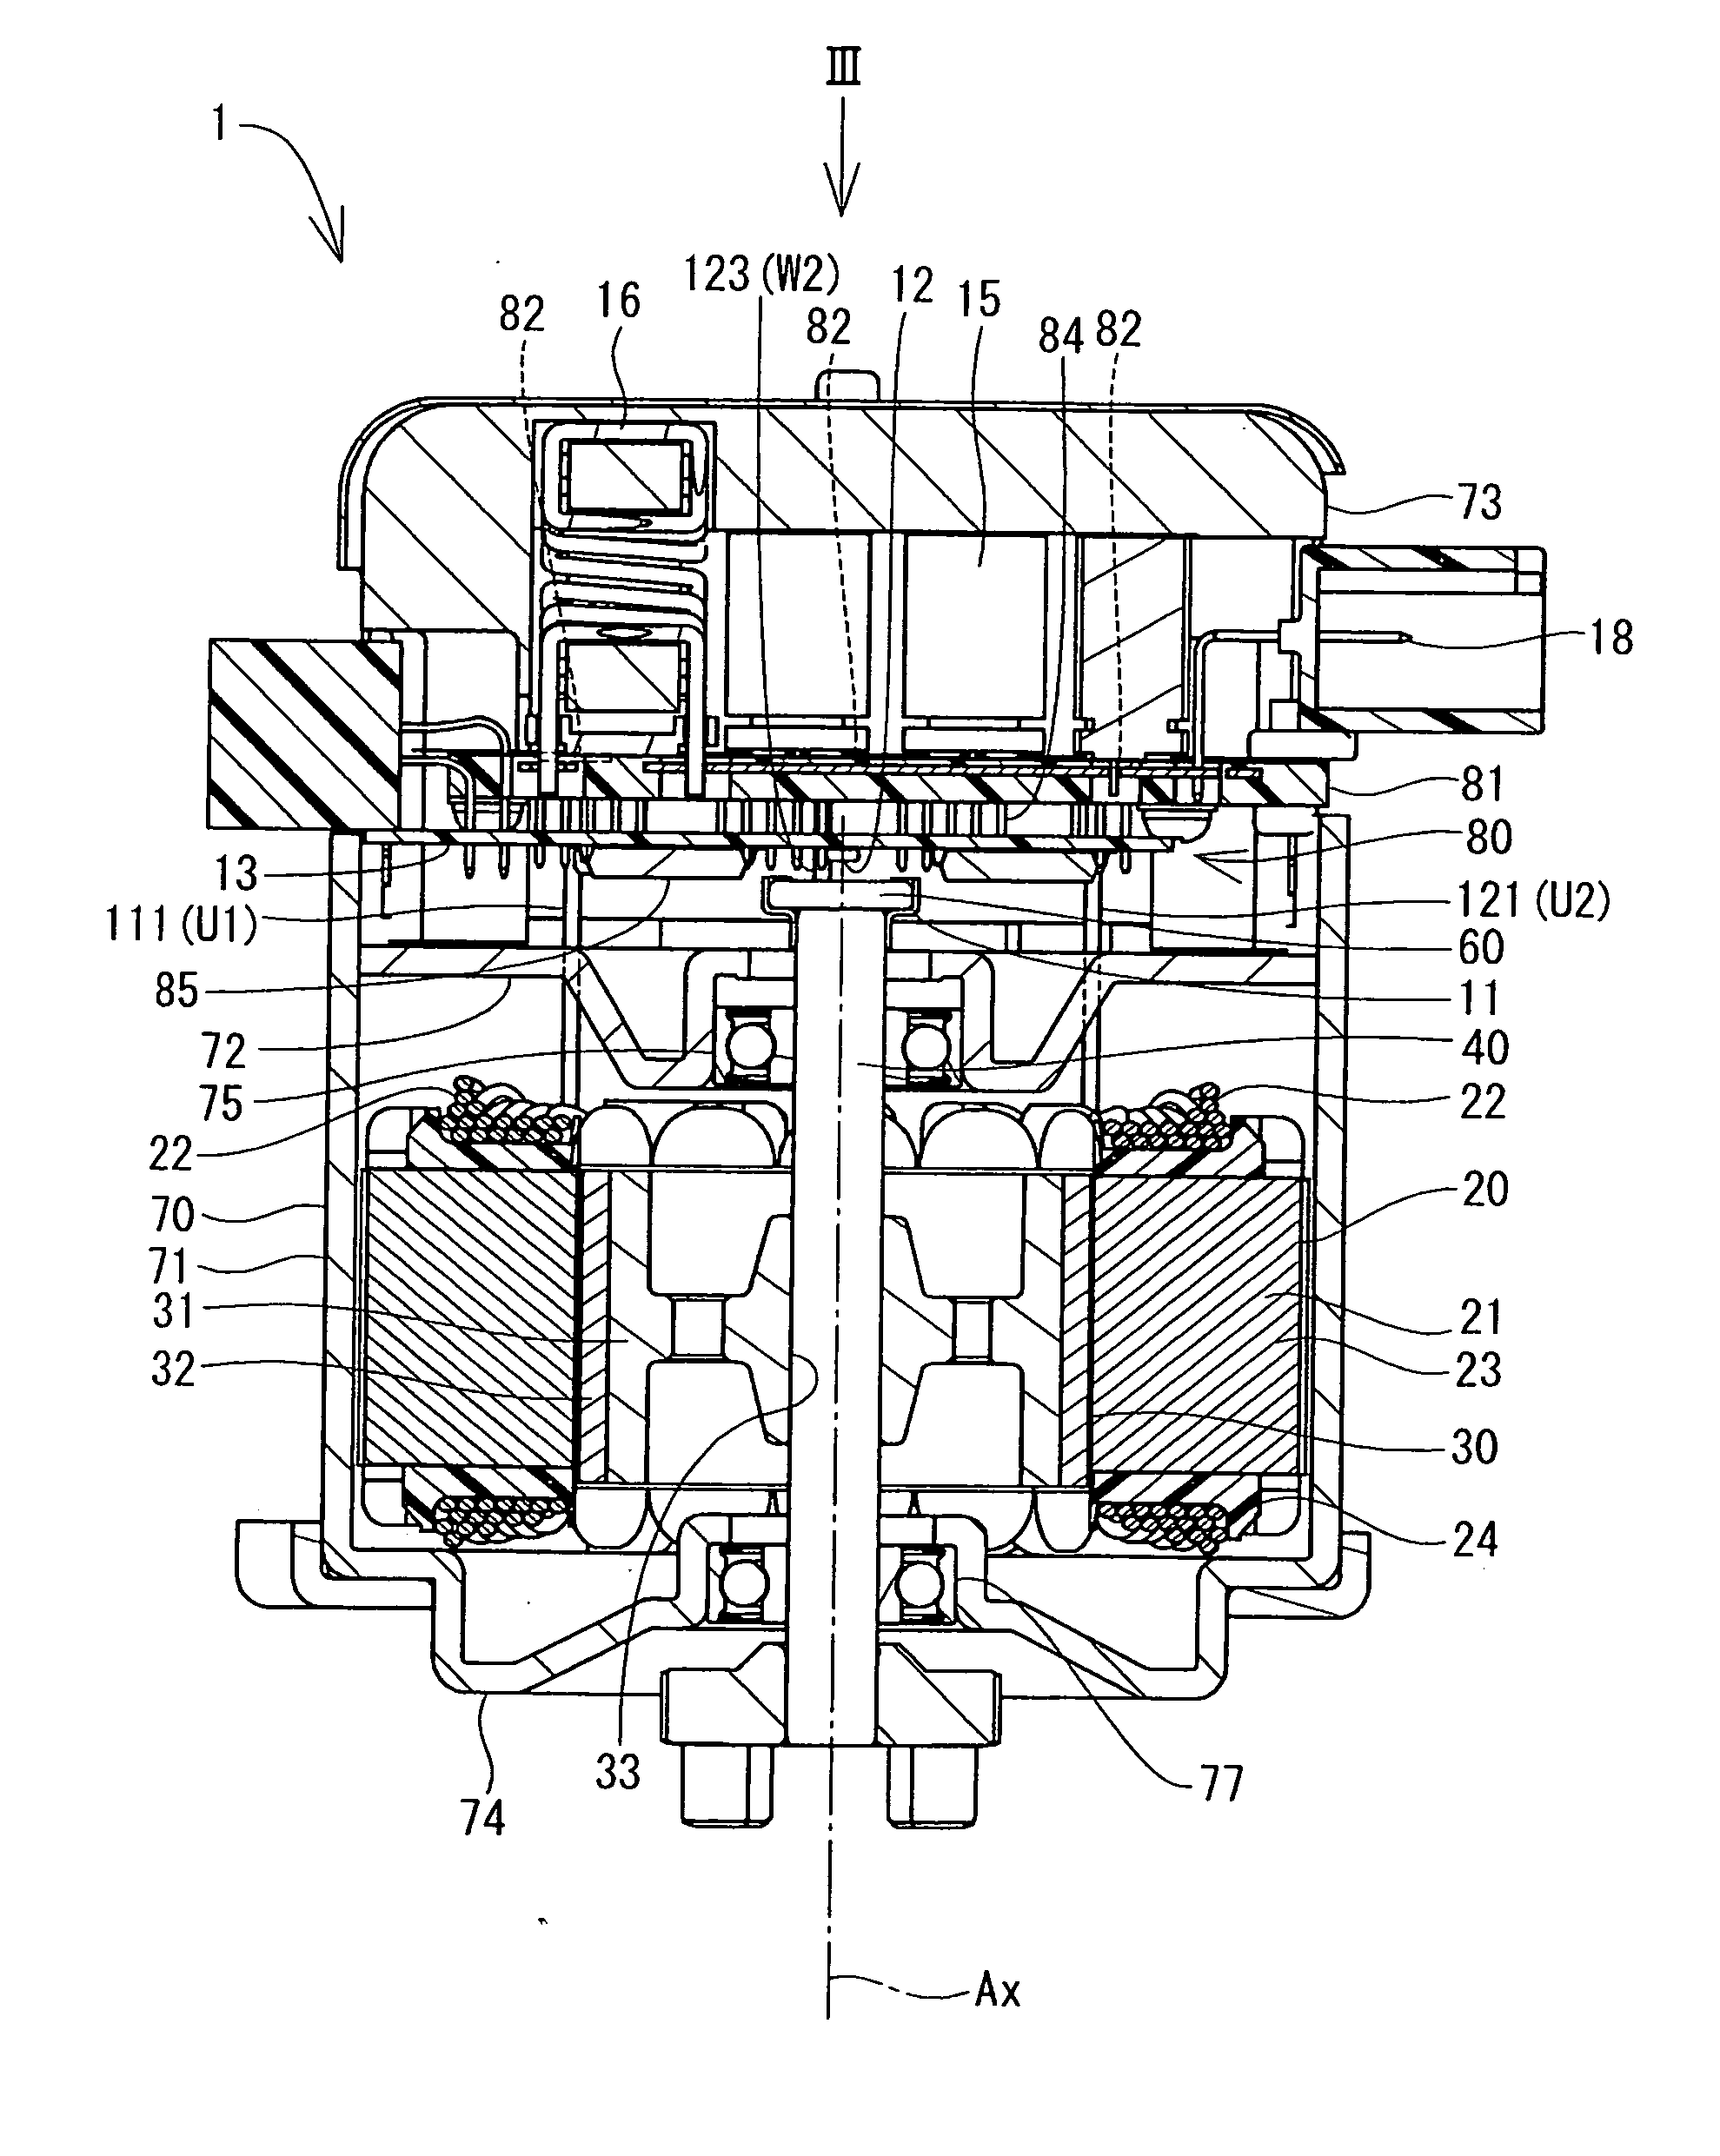 Motor and electric power steering apparatus using motor